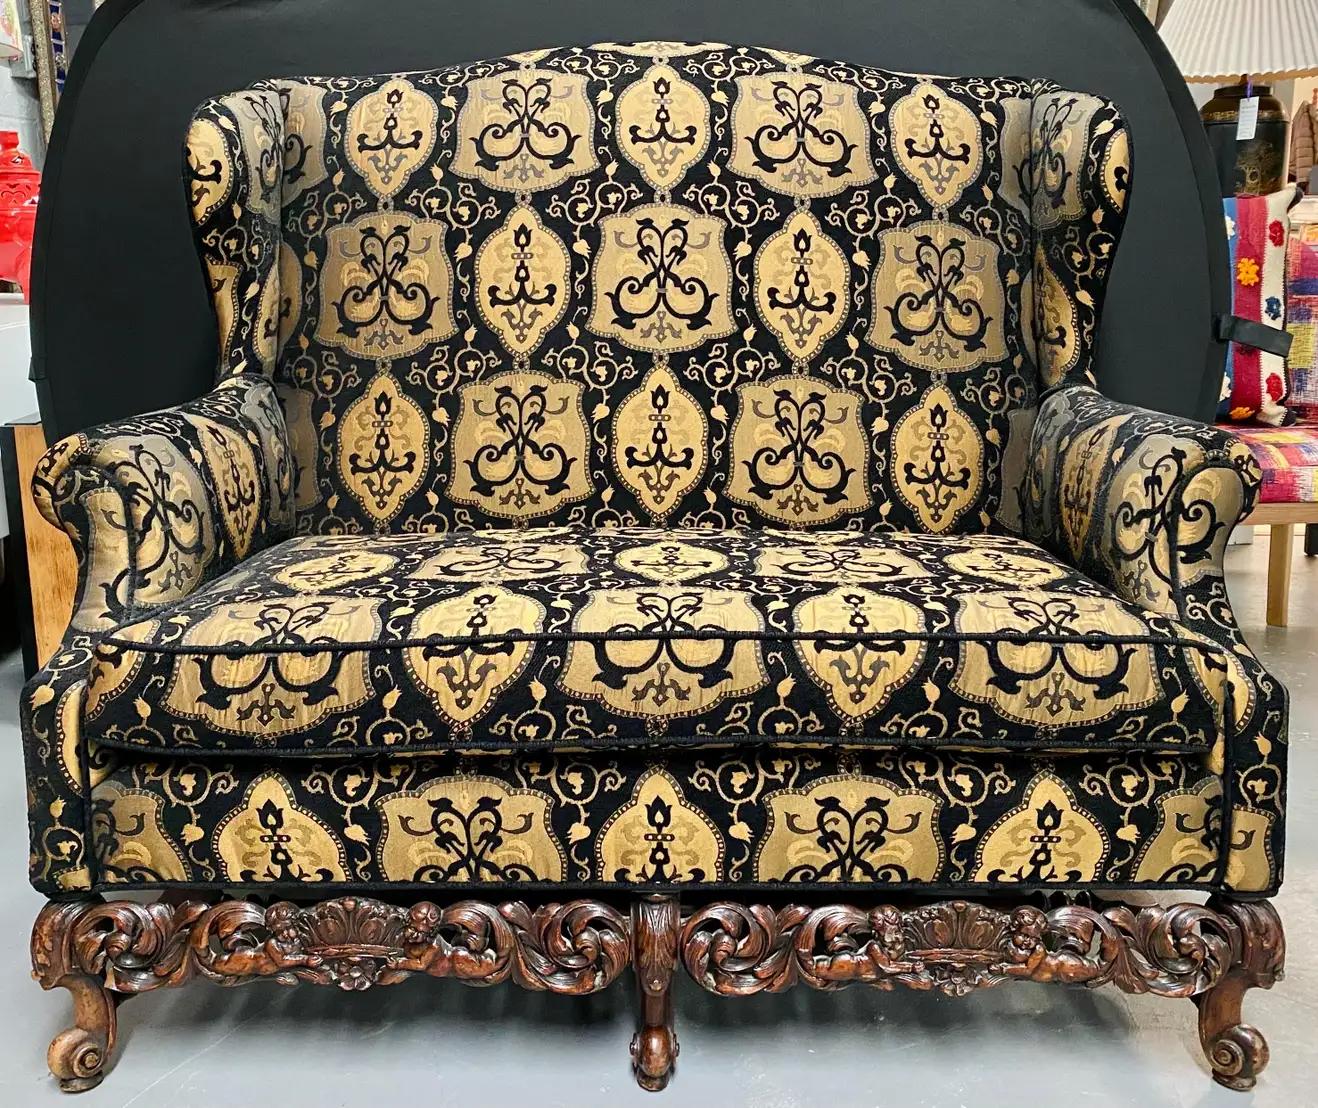 European Rococo Style Settee, Sofa or Canape in Fine Black and Beige Upholstery, a Pair For Sale